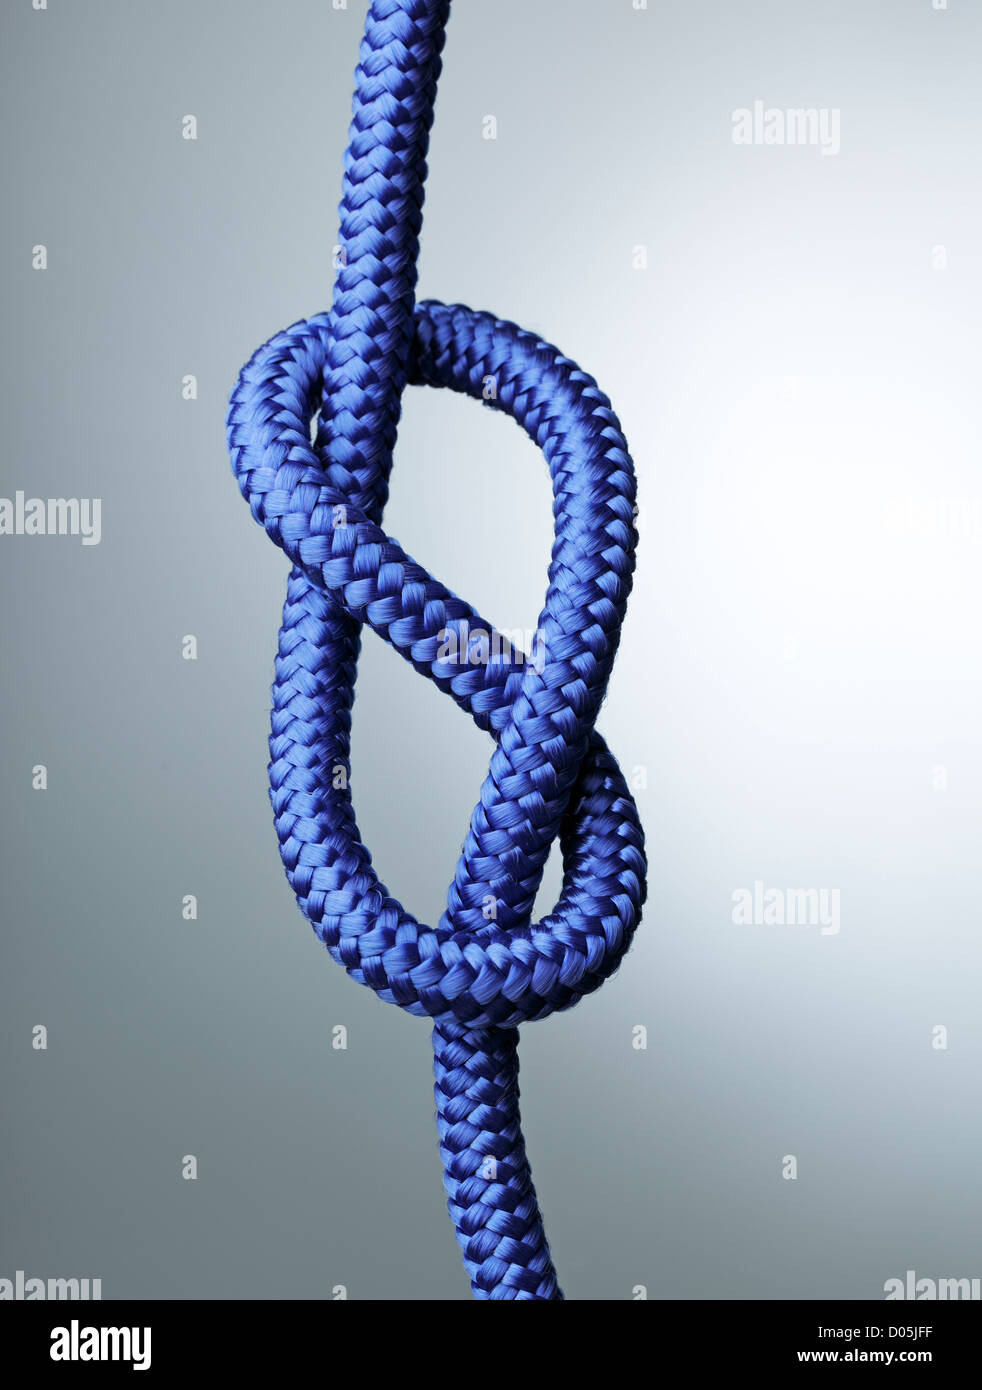 Blue rope with figure of eight stopper knot. Stock Photo